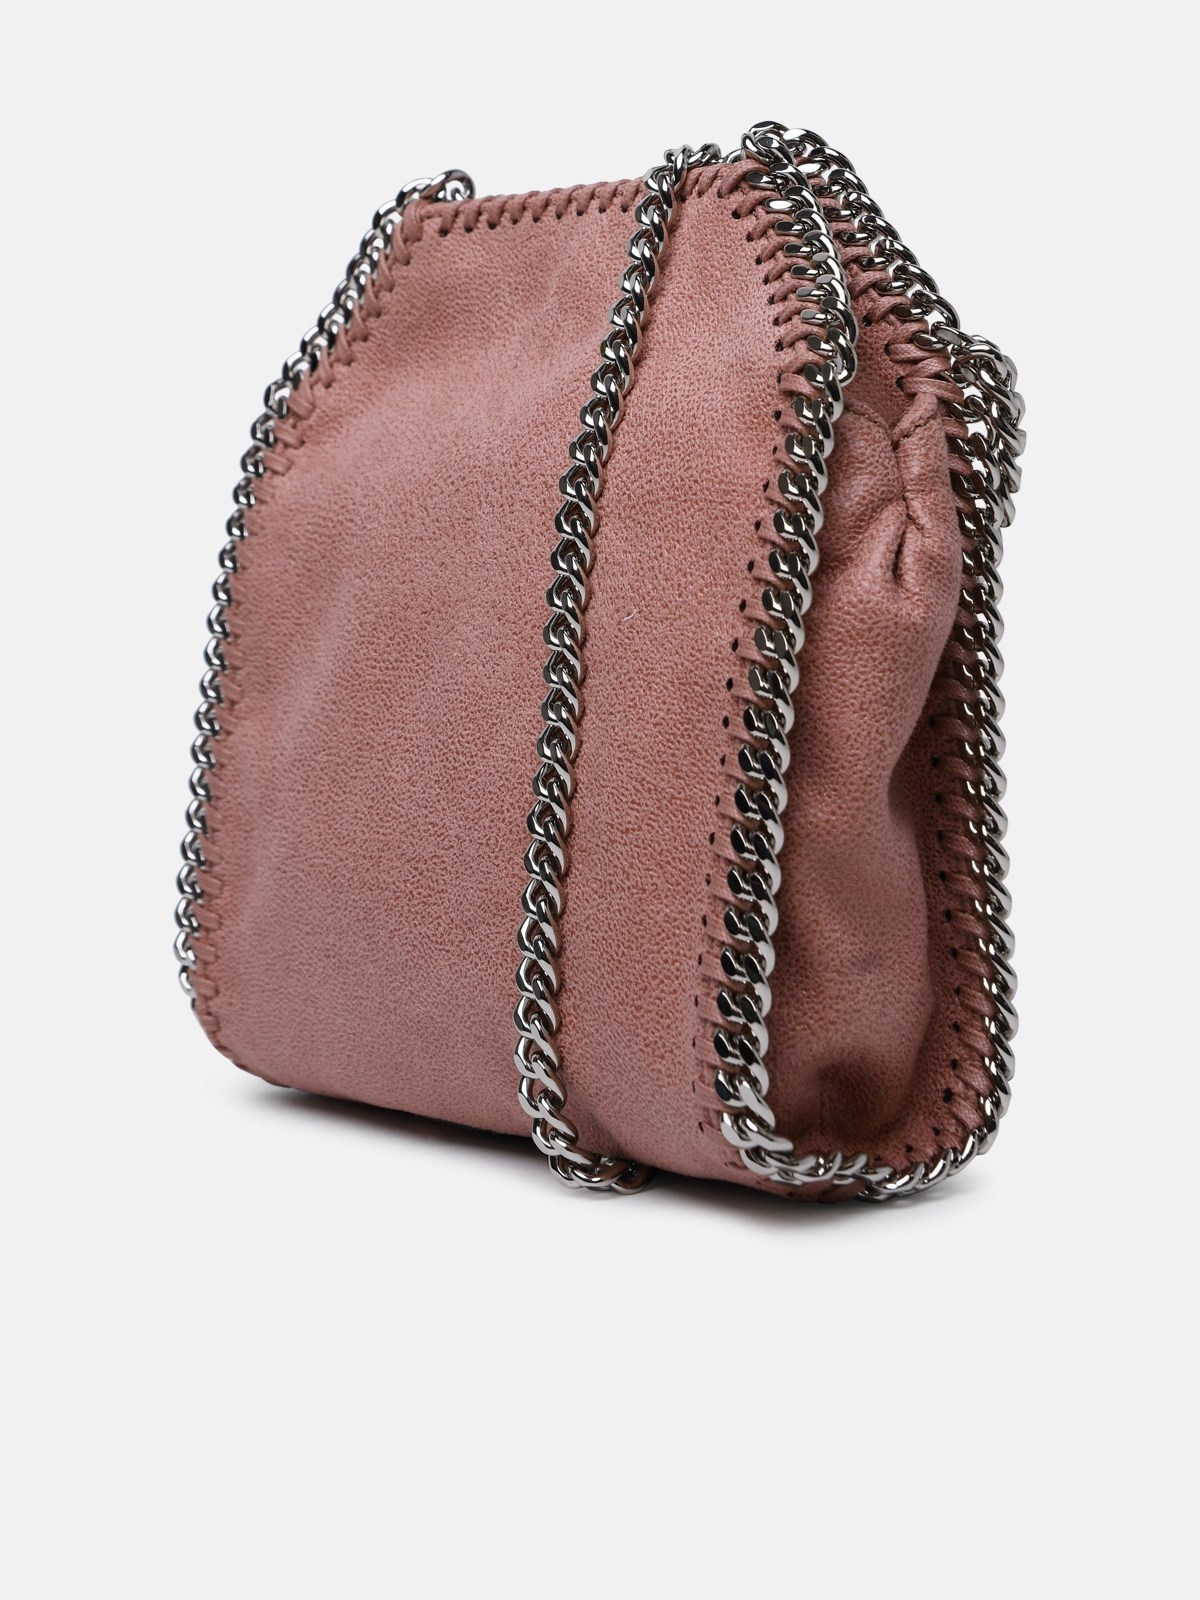 TINY 'FALABELLA' TOTE BAG IN PINK RECYCLED POLYESTER BLEND - 2